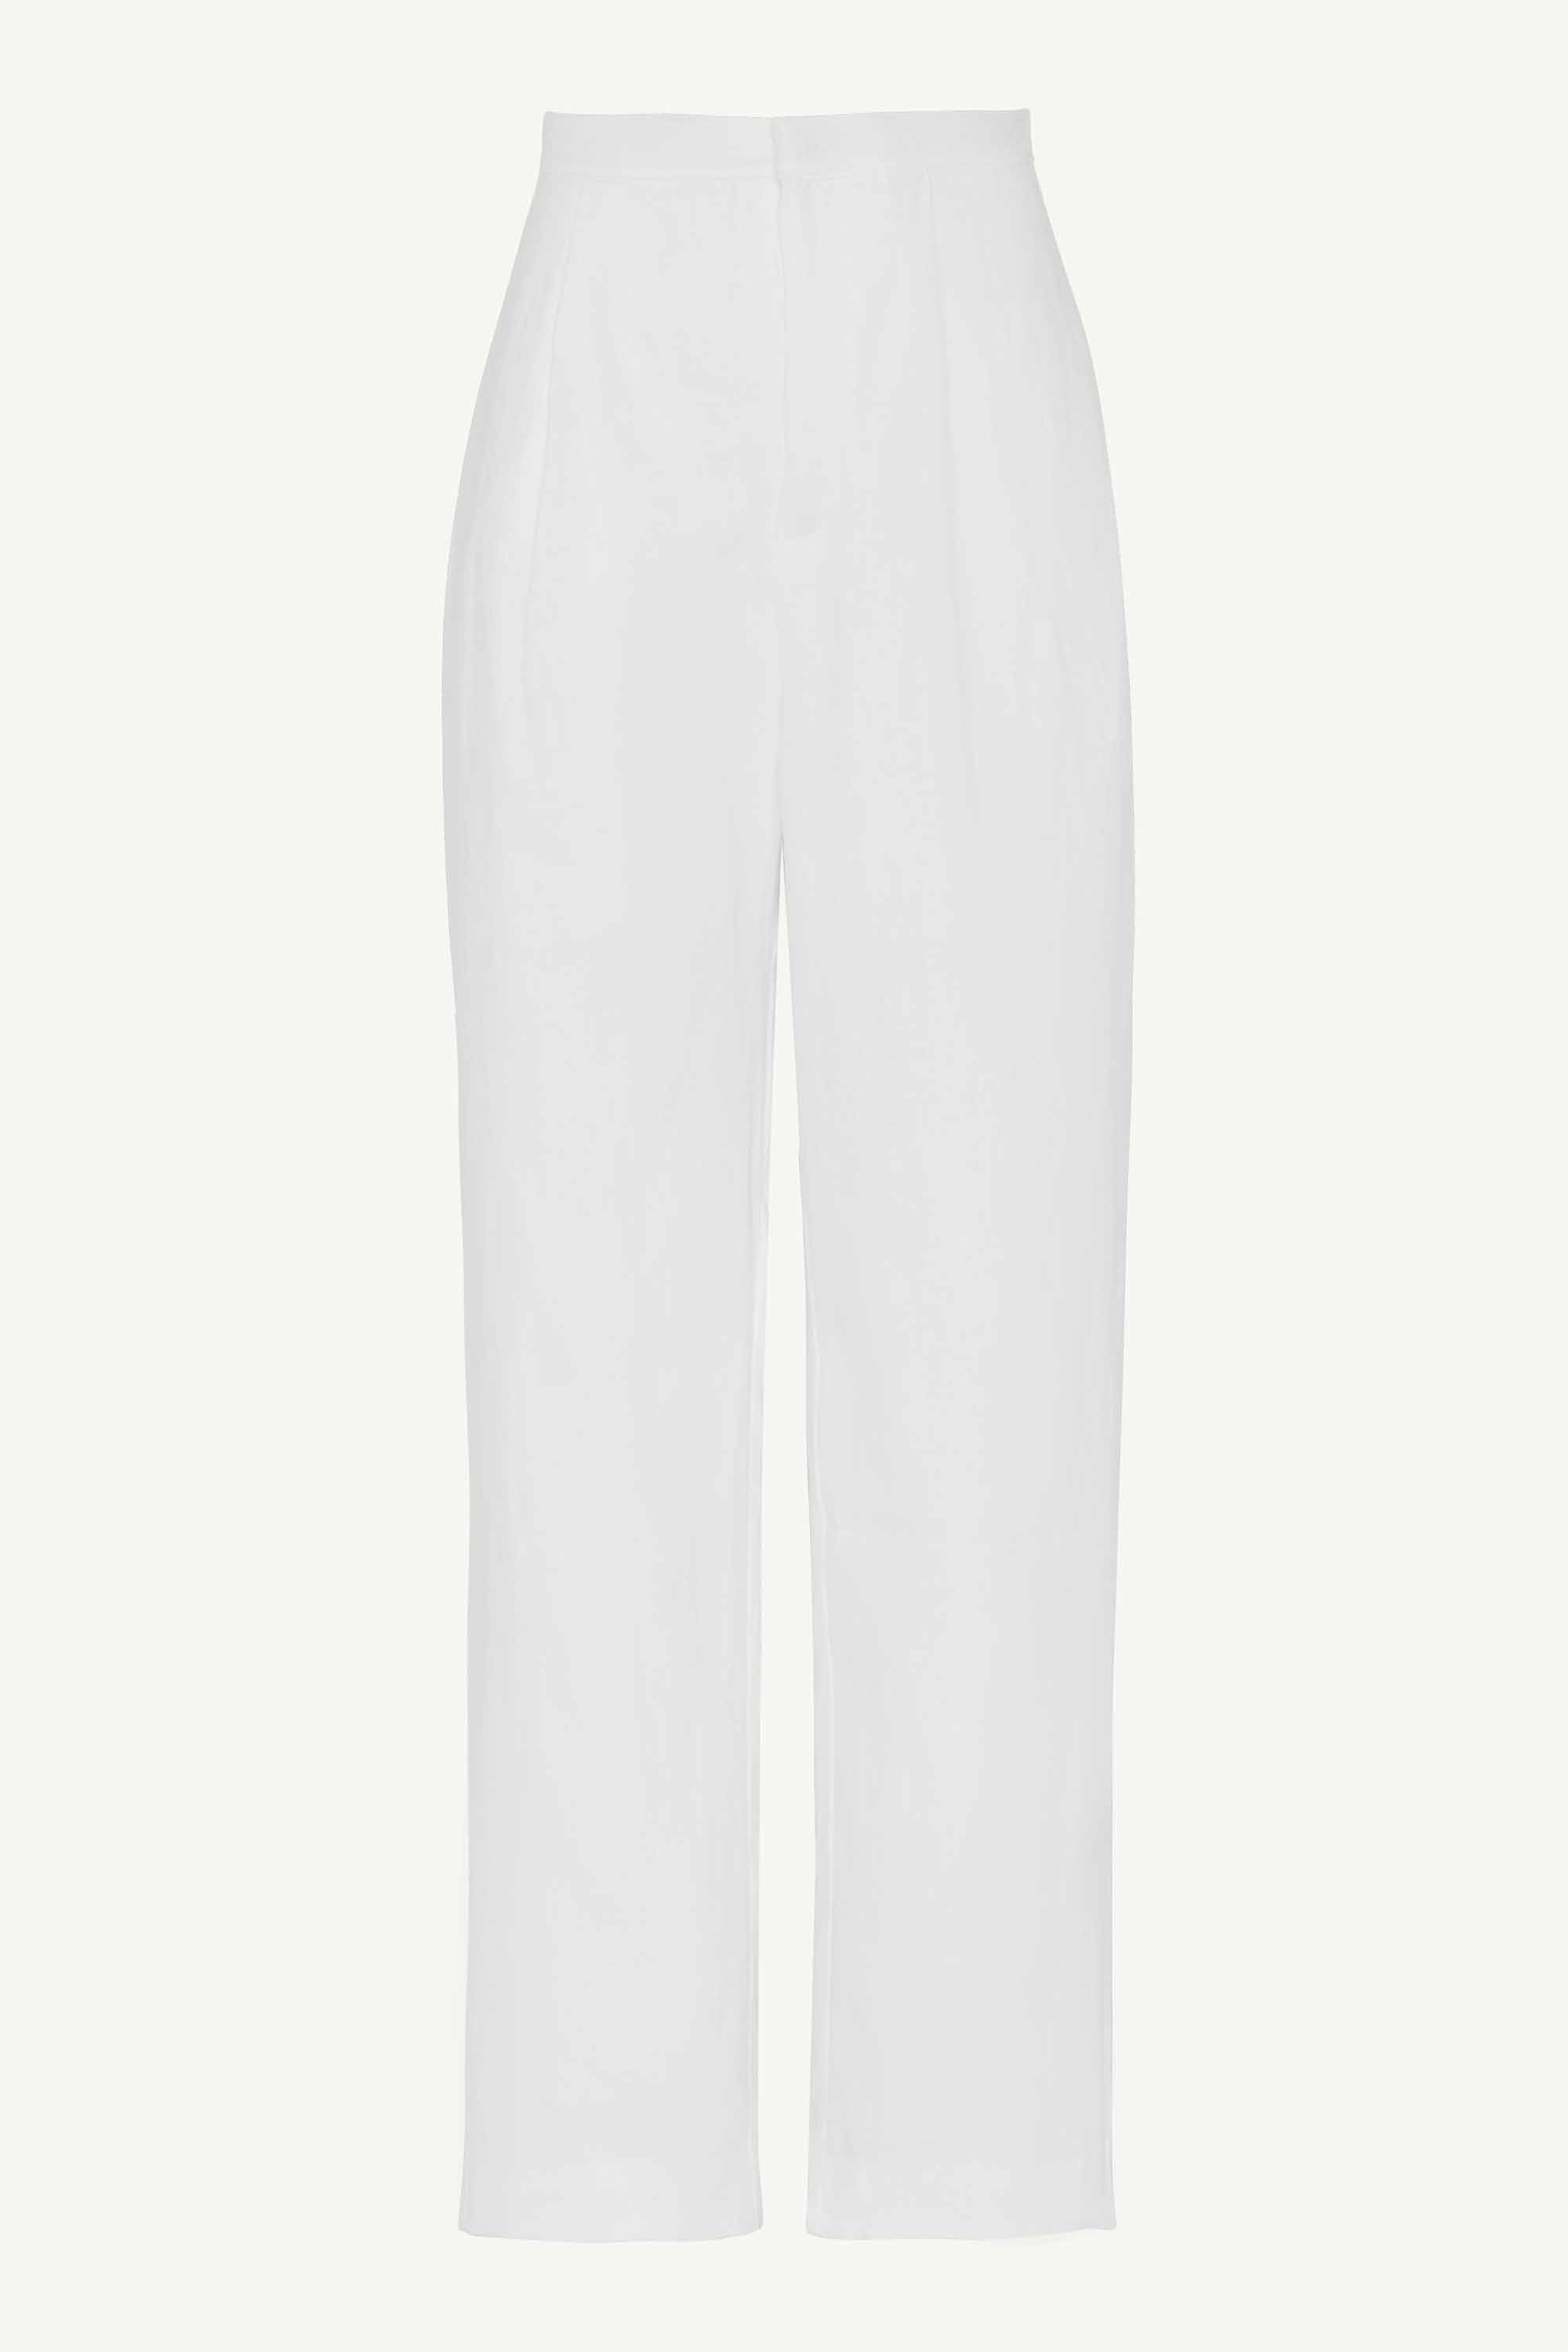 Linen Straight Leg Pants - White Clothing Veiled Collection 